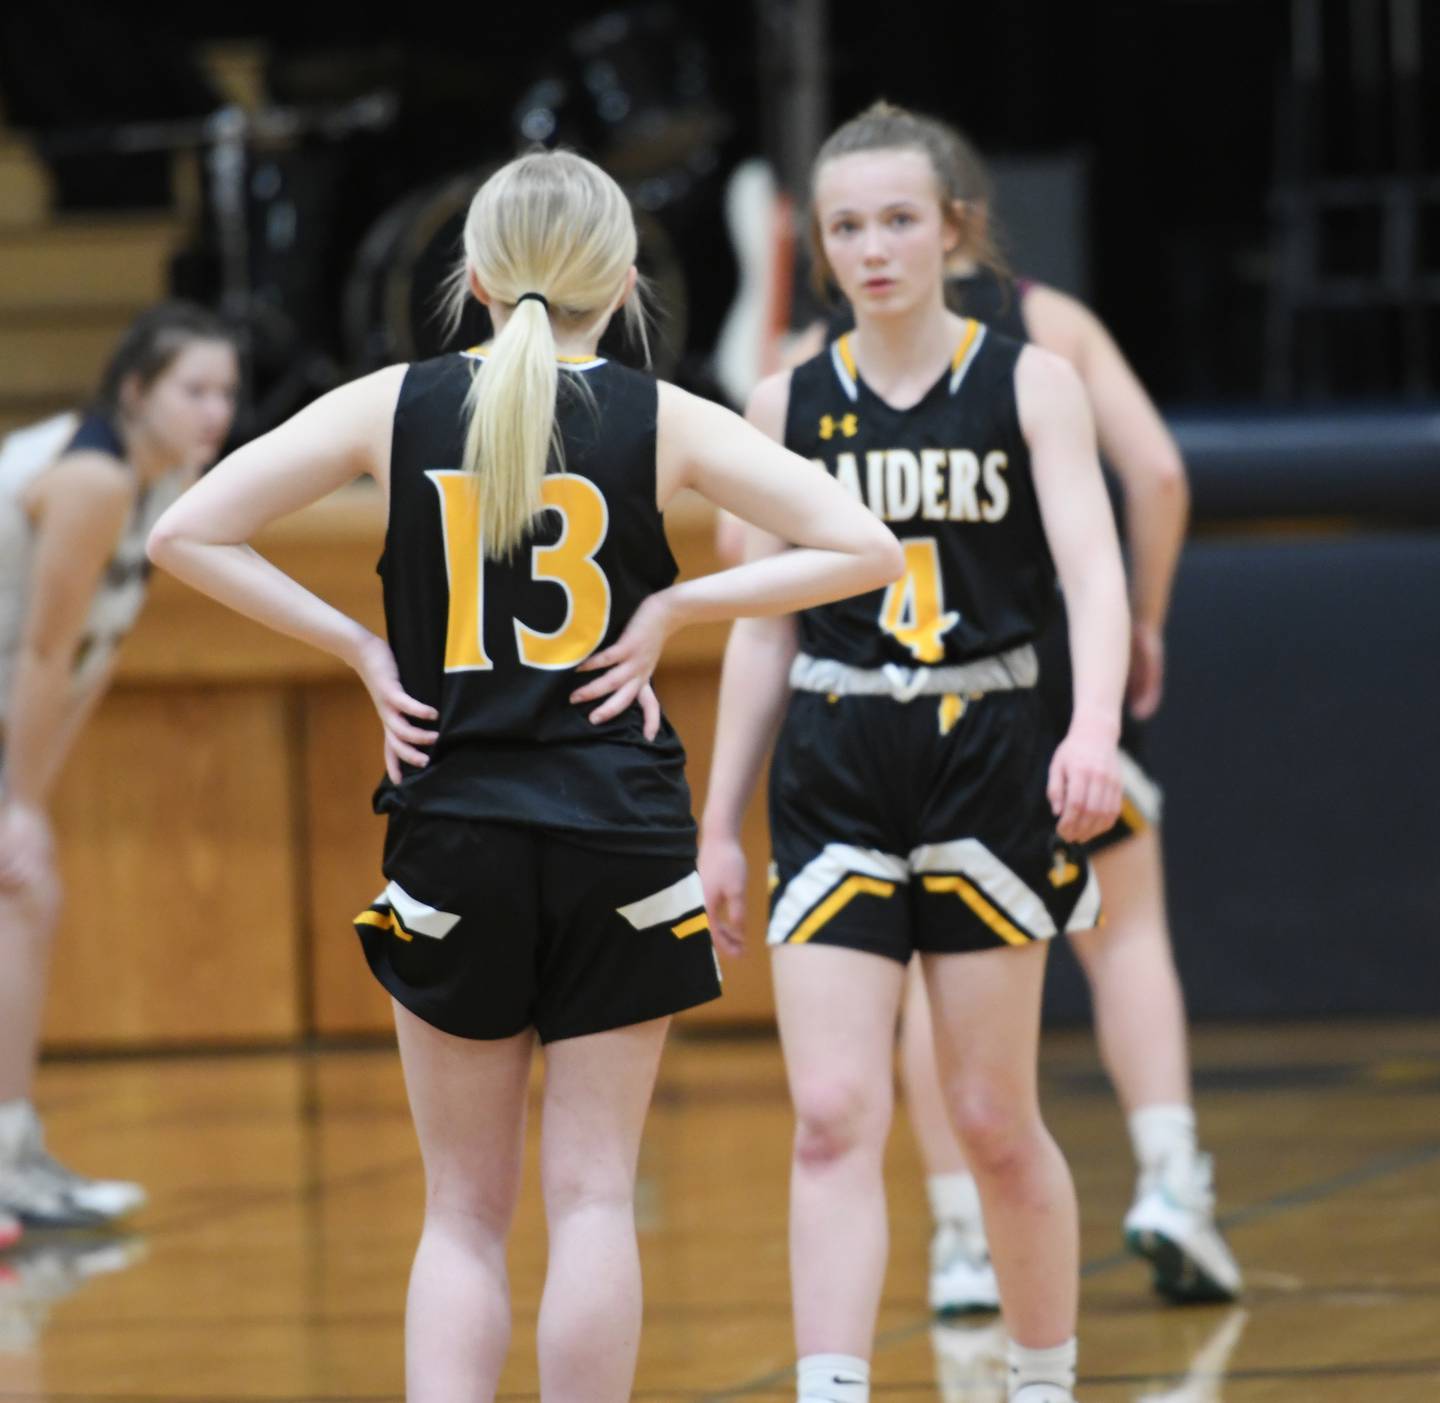 AFC's Reese Polk (4) walks towards Cameryn Winterland (13) in the final seconds of their game with Polo on Friday, Feb. 3.